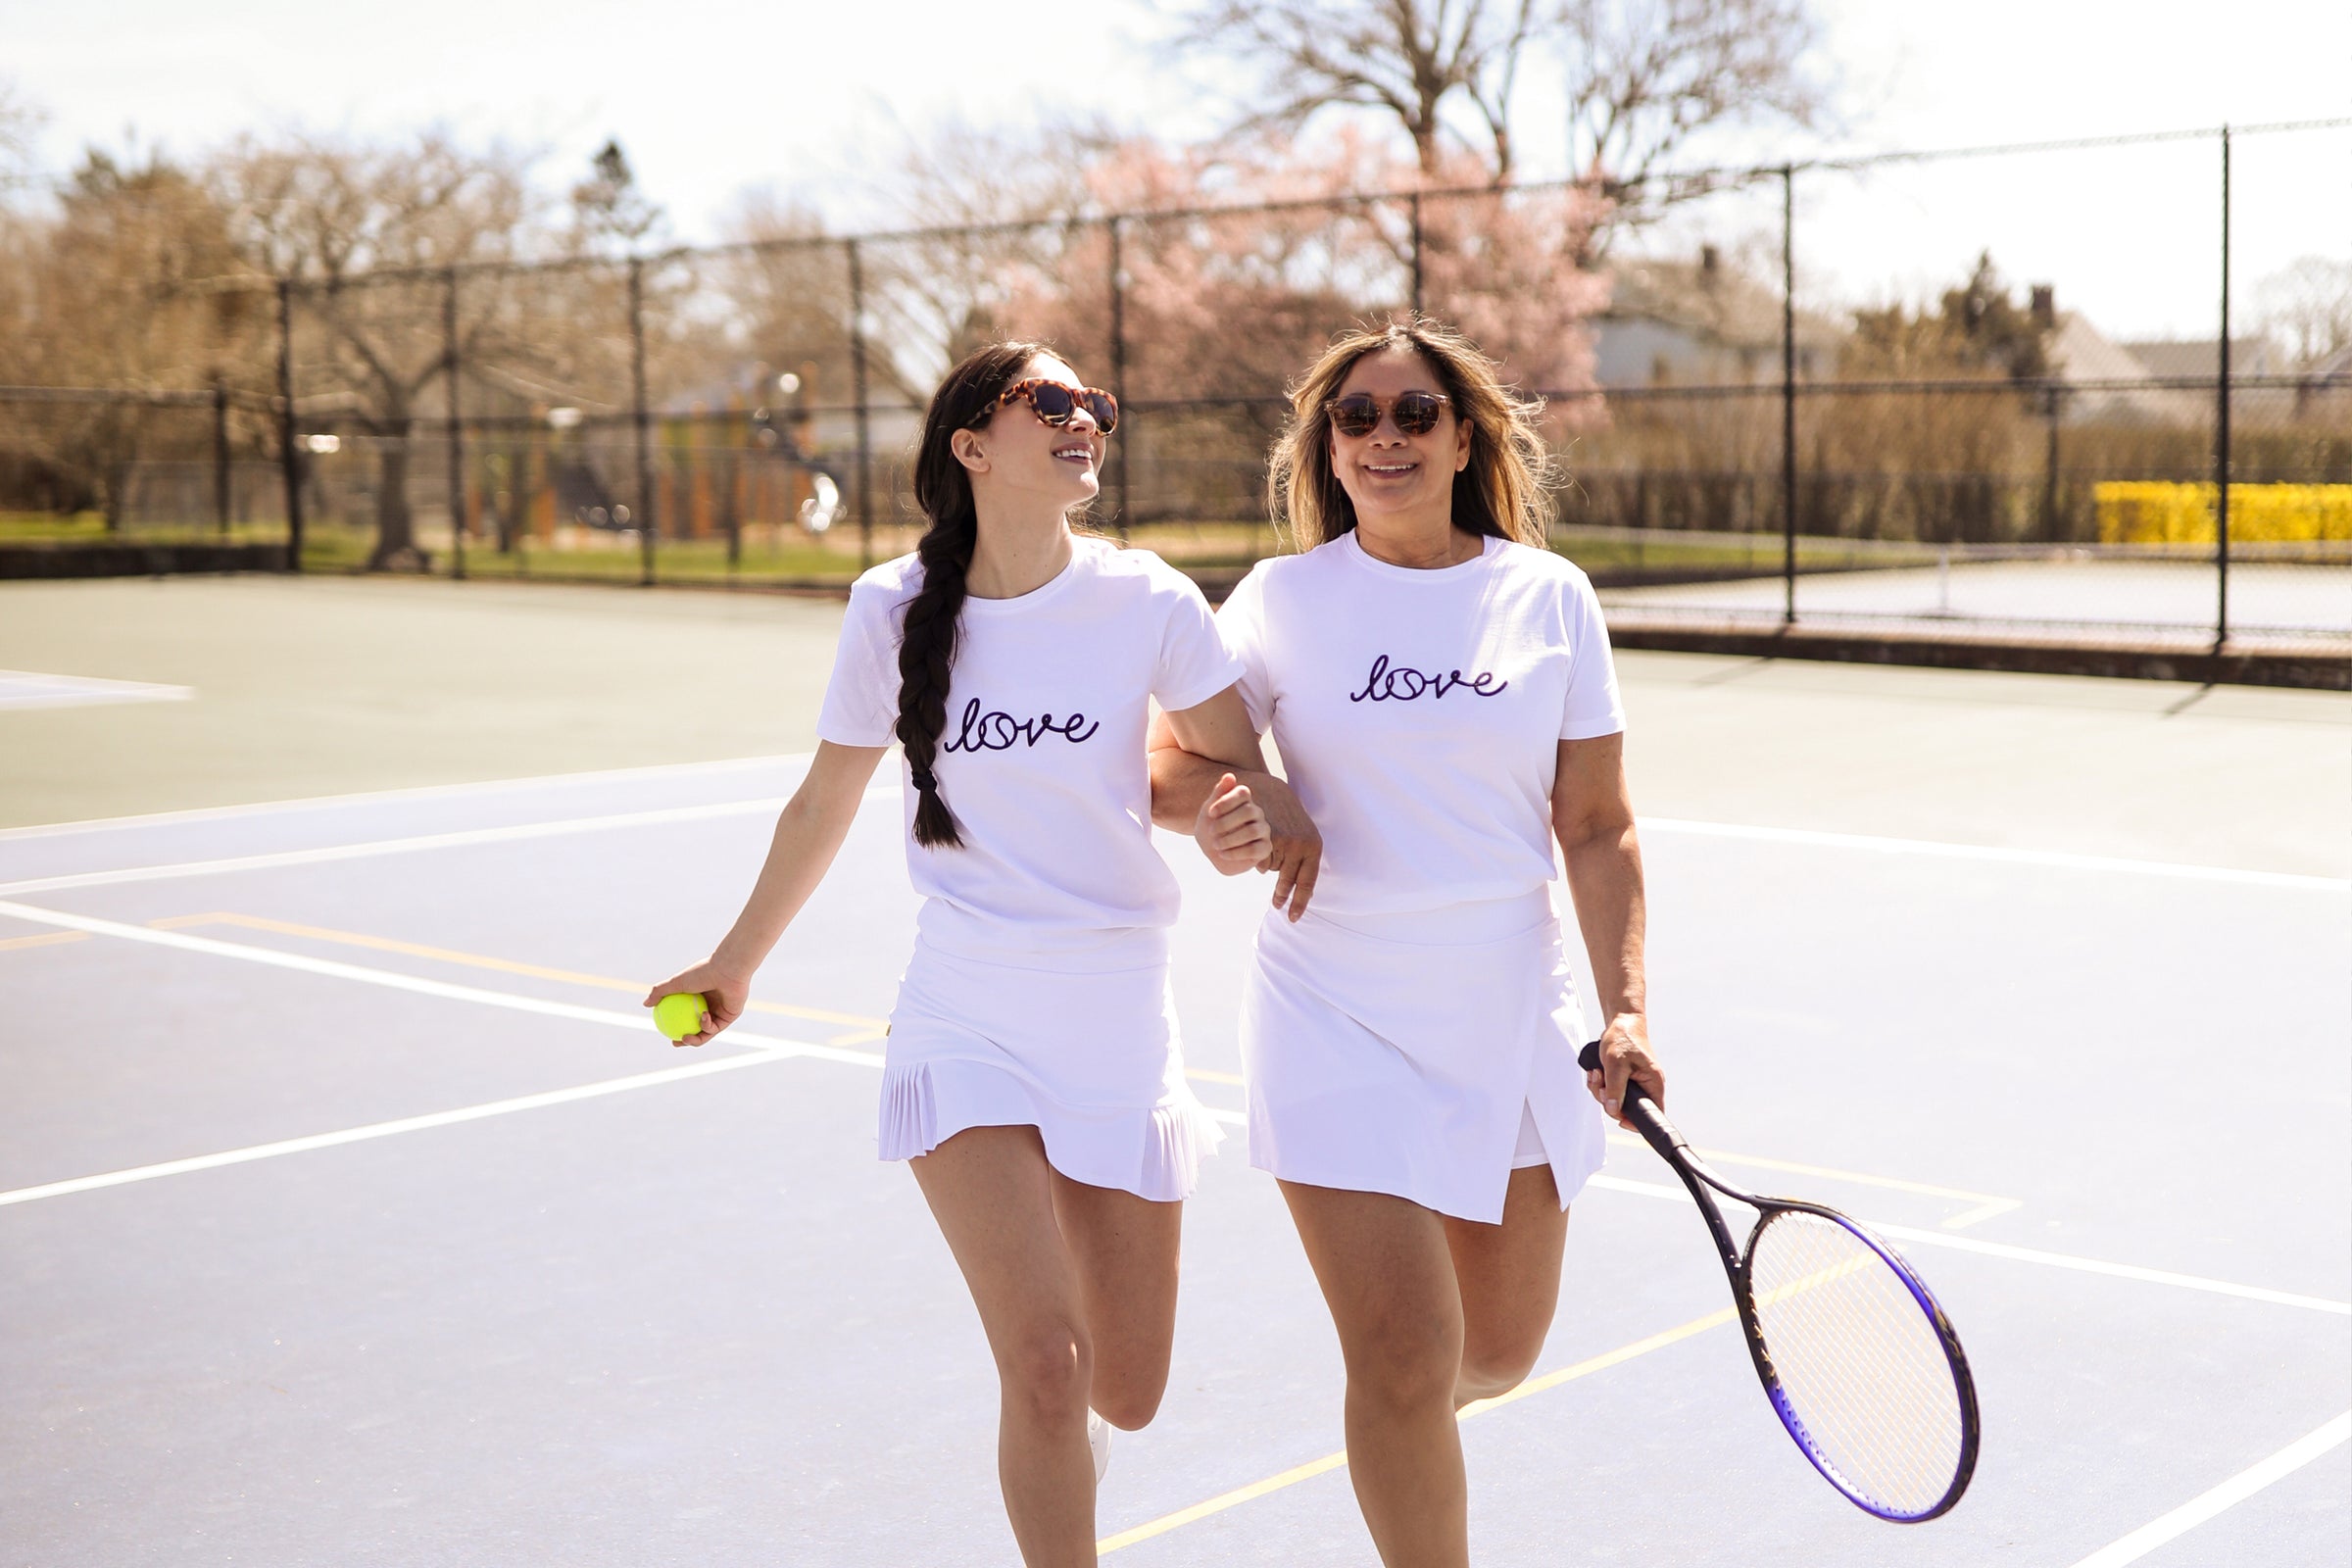 Mother and Daughter walk and laugh together on a tennis court. They are both wearing white t-shirts that say "love" in navy cursive font.